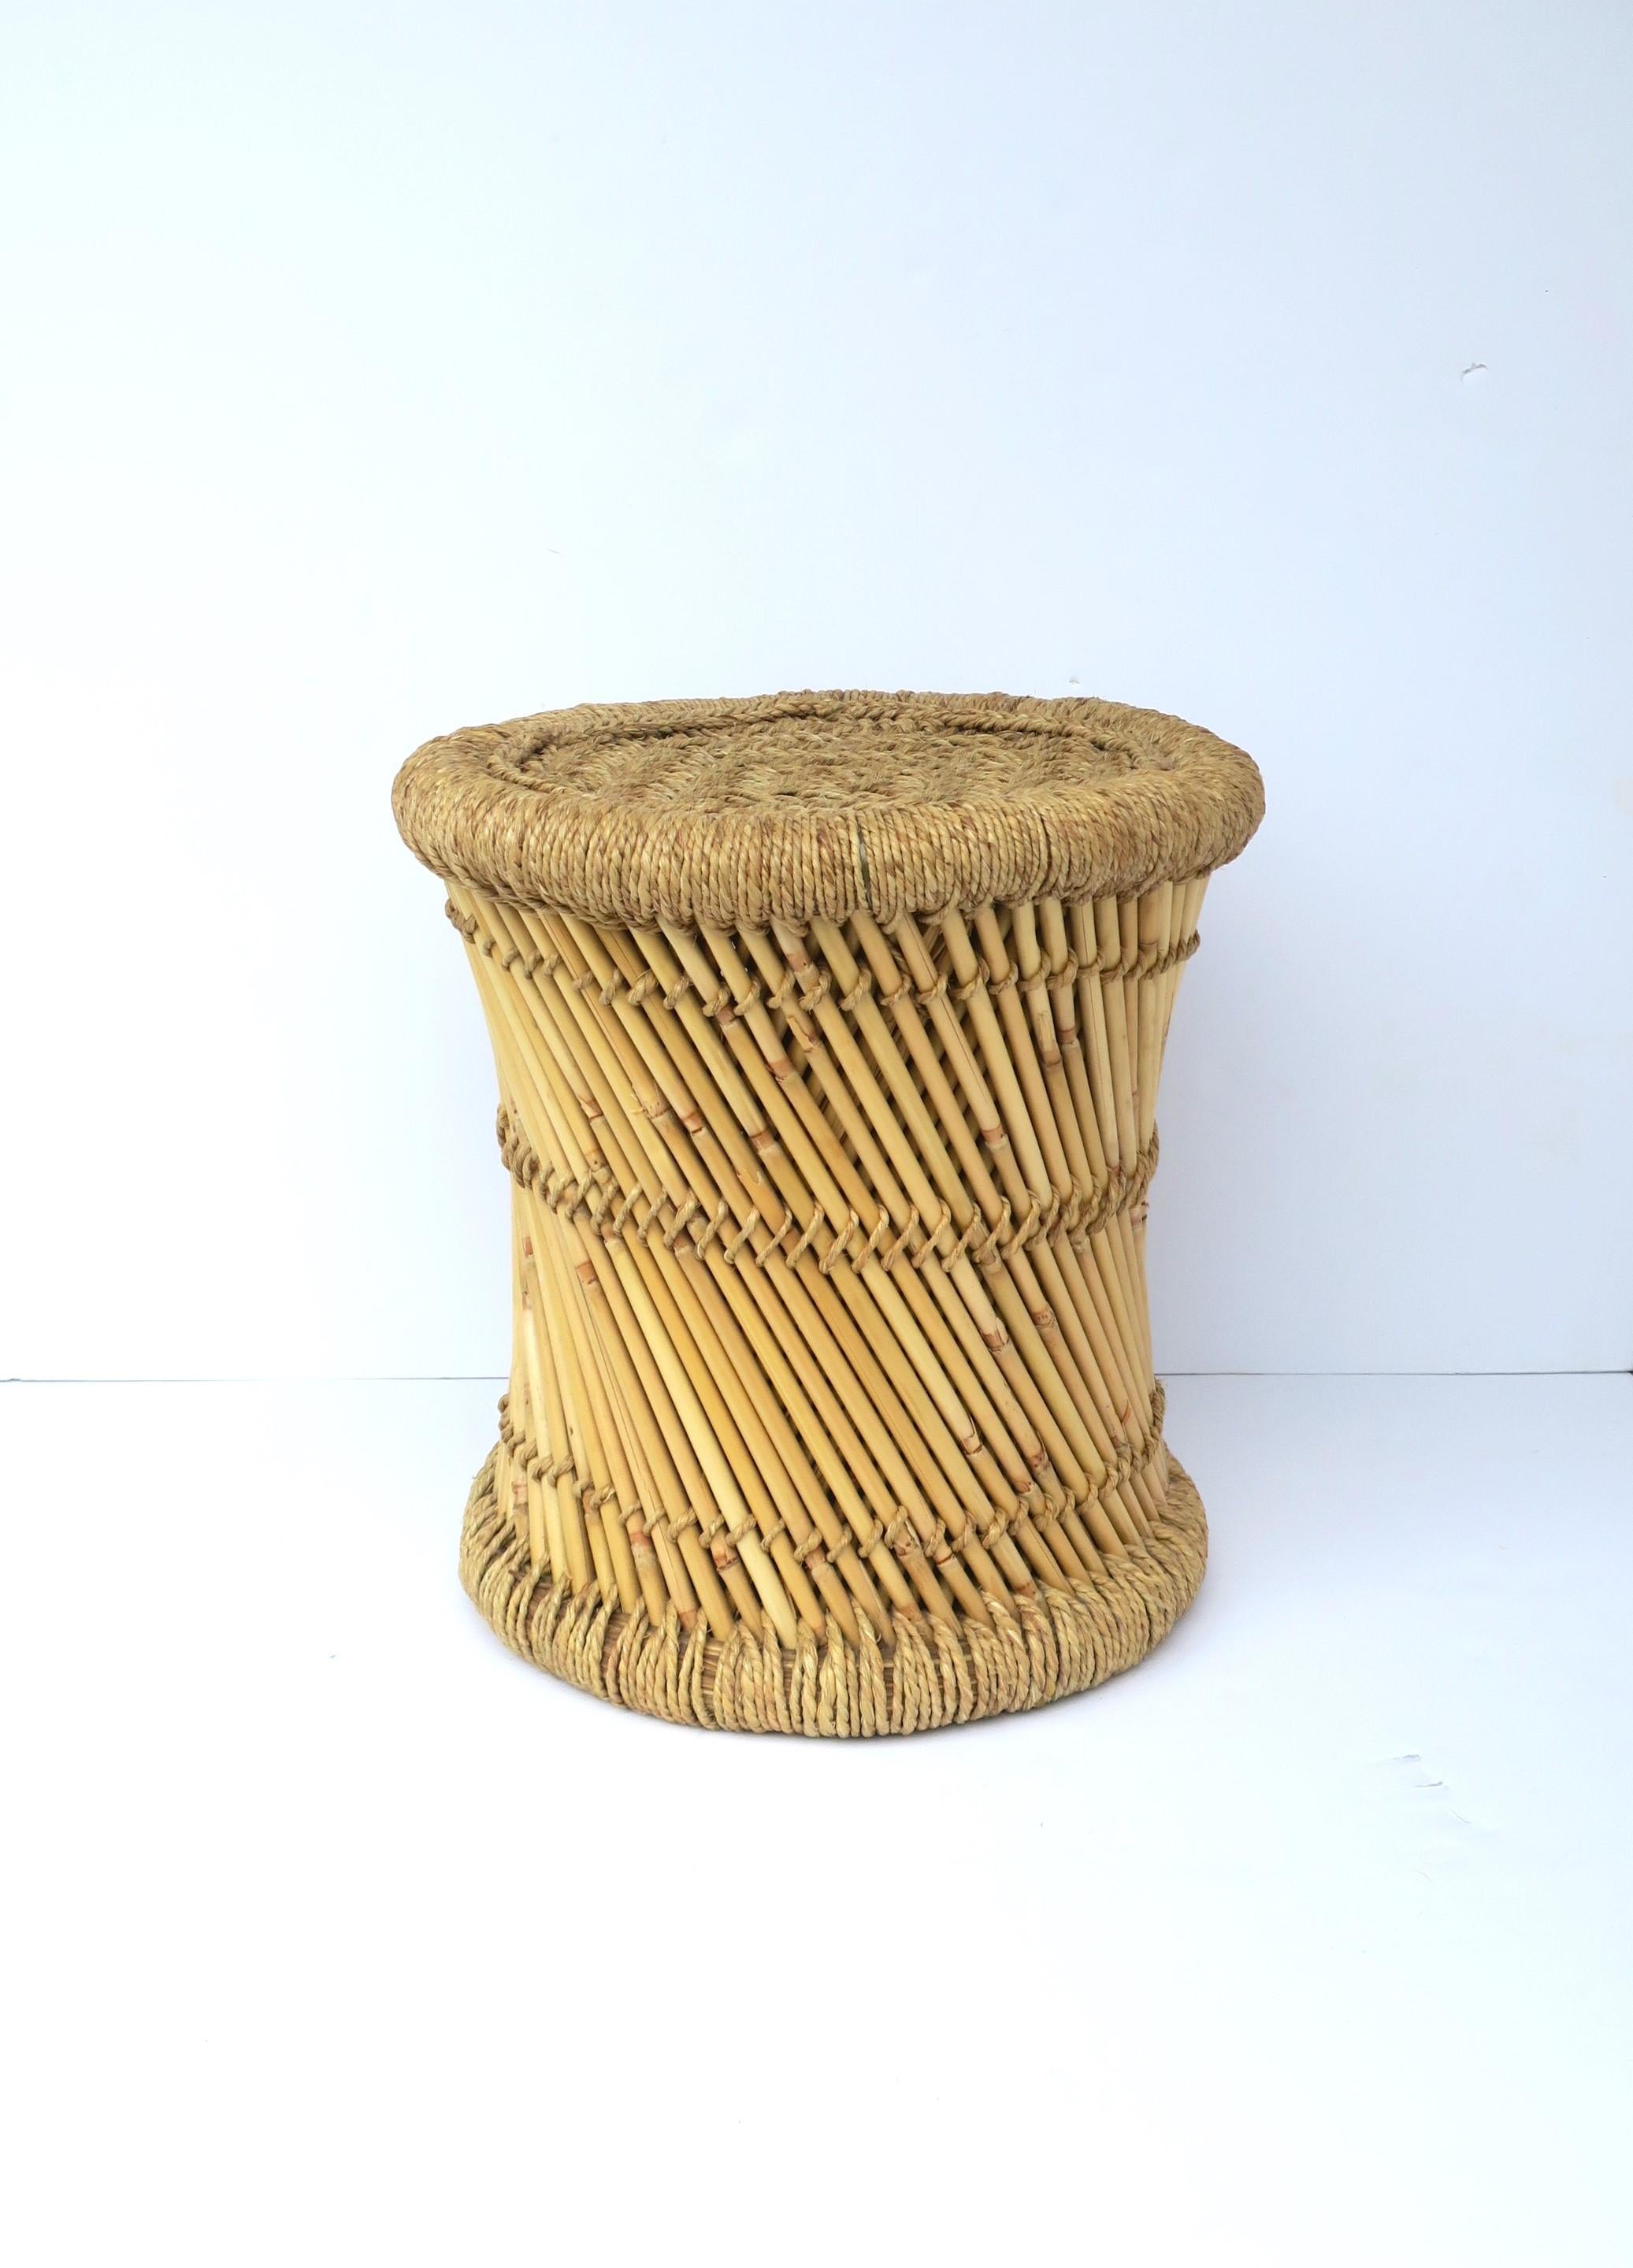 A blonde wicker pencil reed stool in the Anglo Raj style. Stool is sturdy and well-made and can support a human being (as intended.) Stool can also double as drink table (providing there's a stable environment on top, e.g. a book), or hold/display